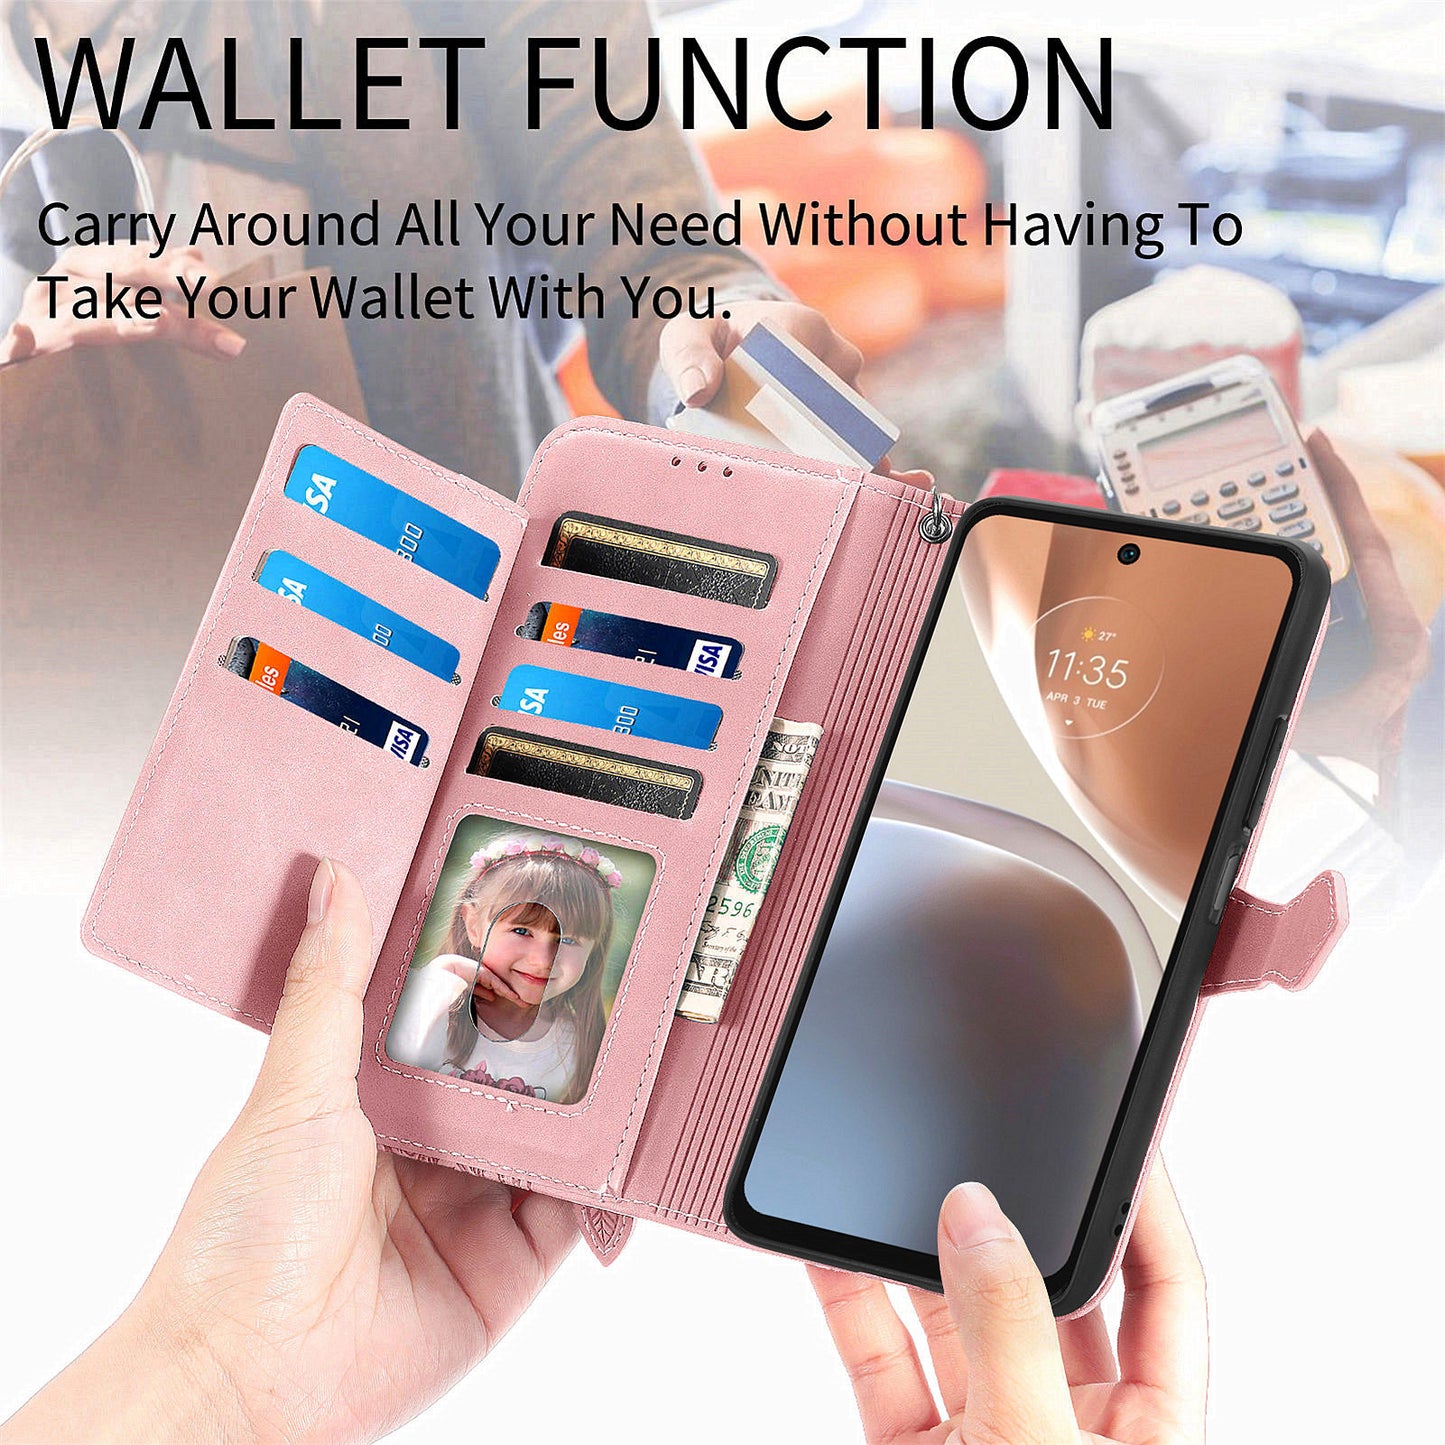 For Motorola Moto G32 4G Flower Imprinted Pattern Drop-proof PU Leather Zipper Pocket Cell Phone Cover Stand Wallet Case